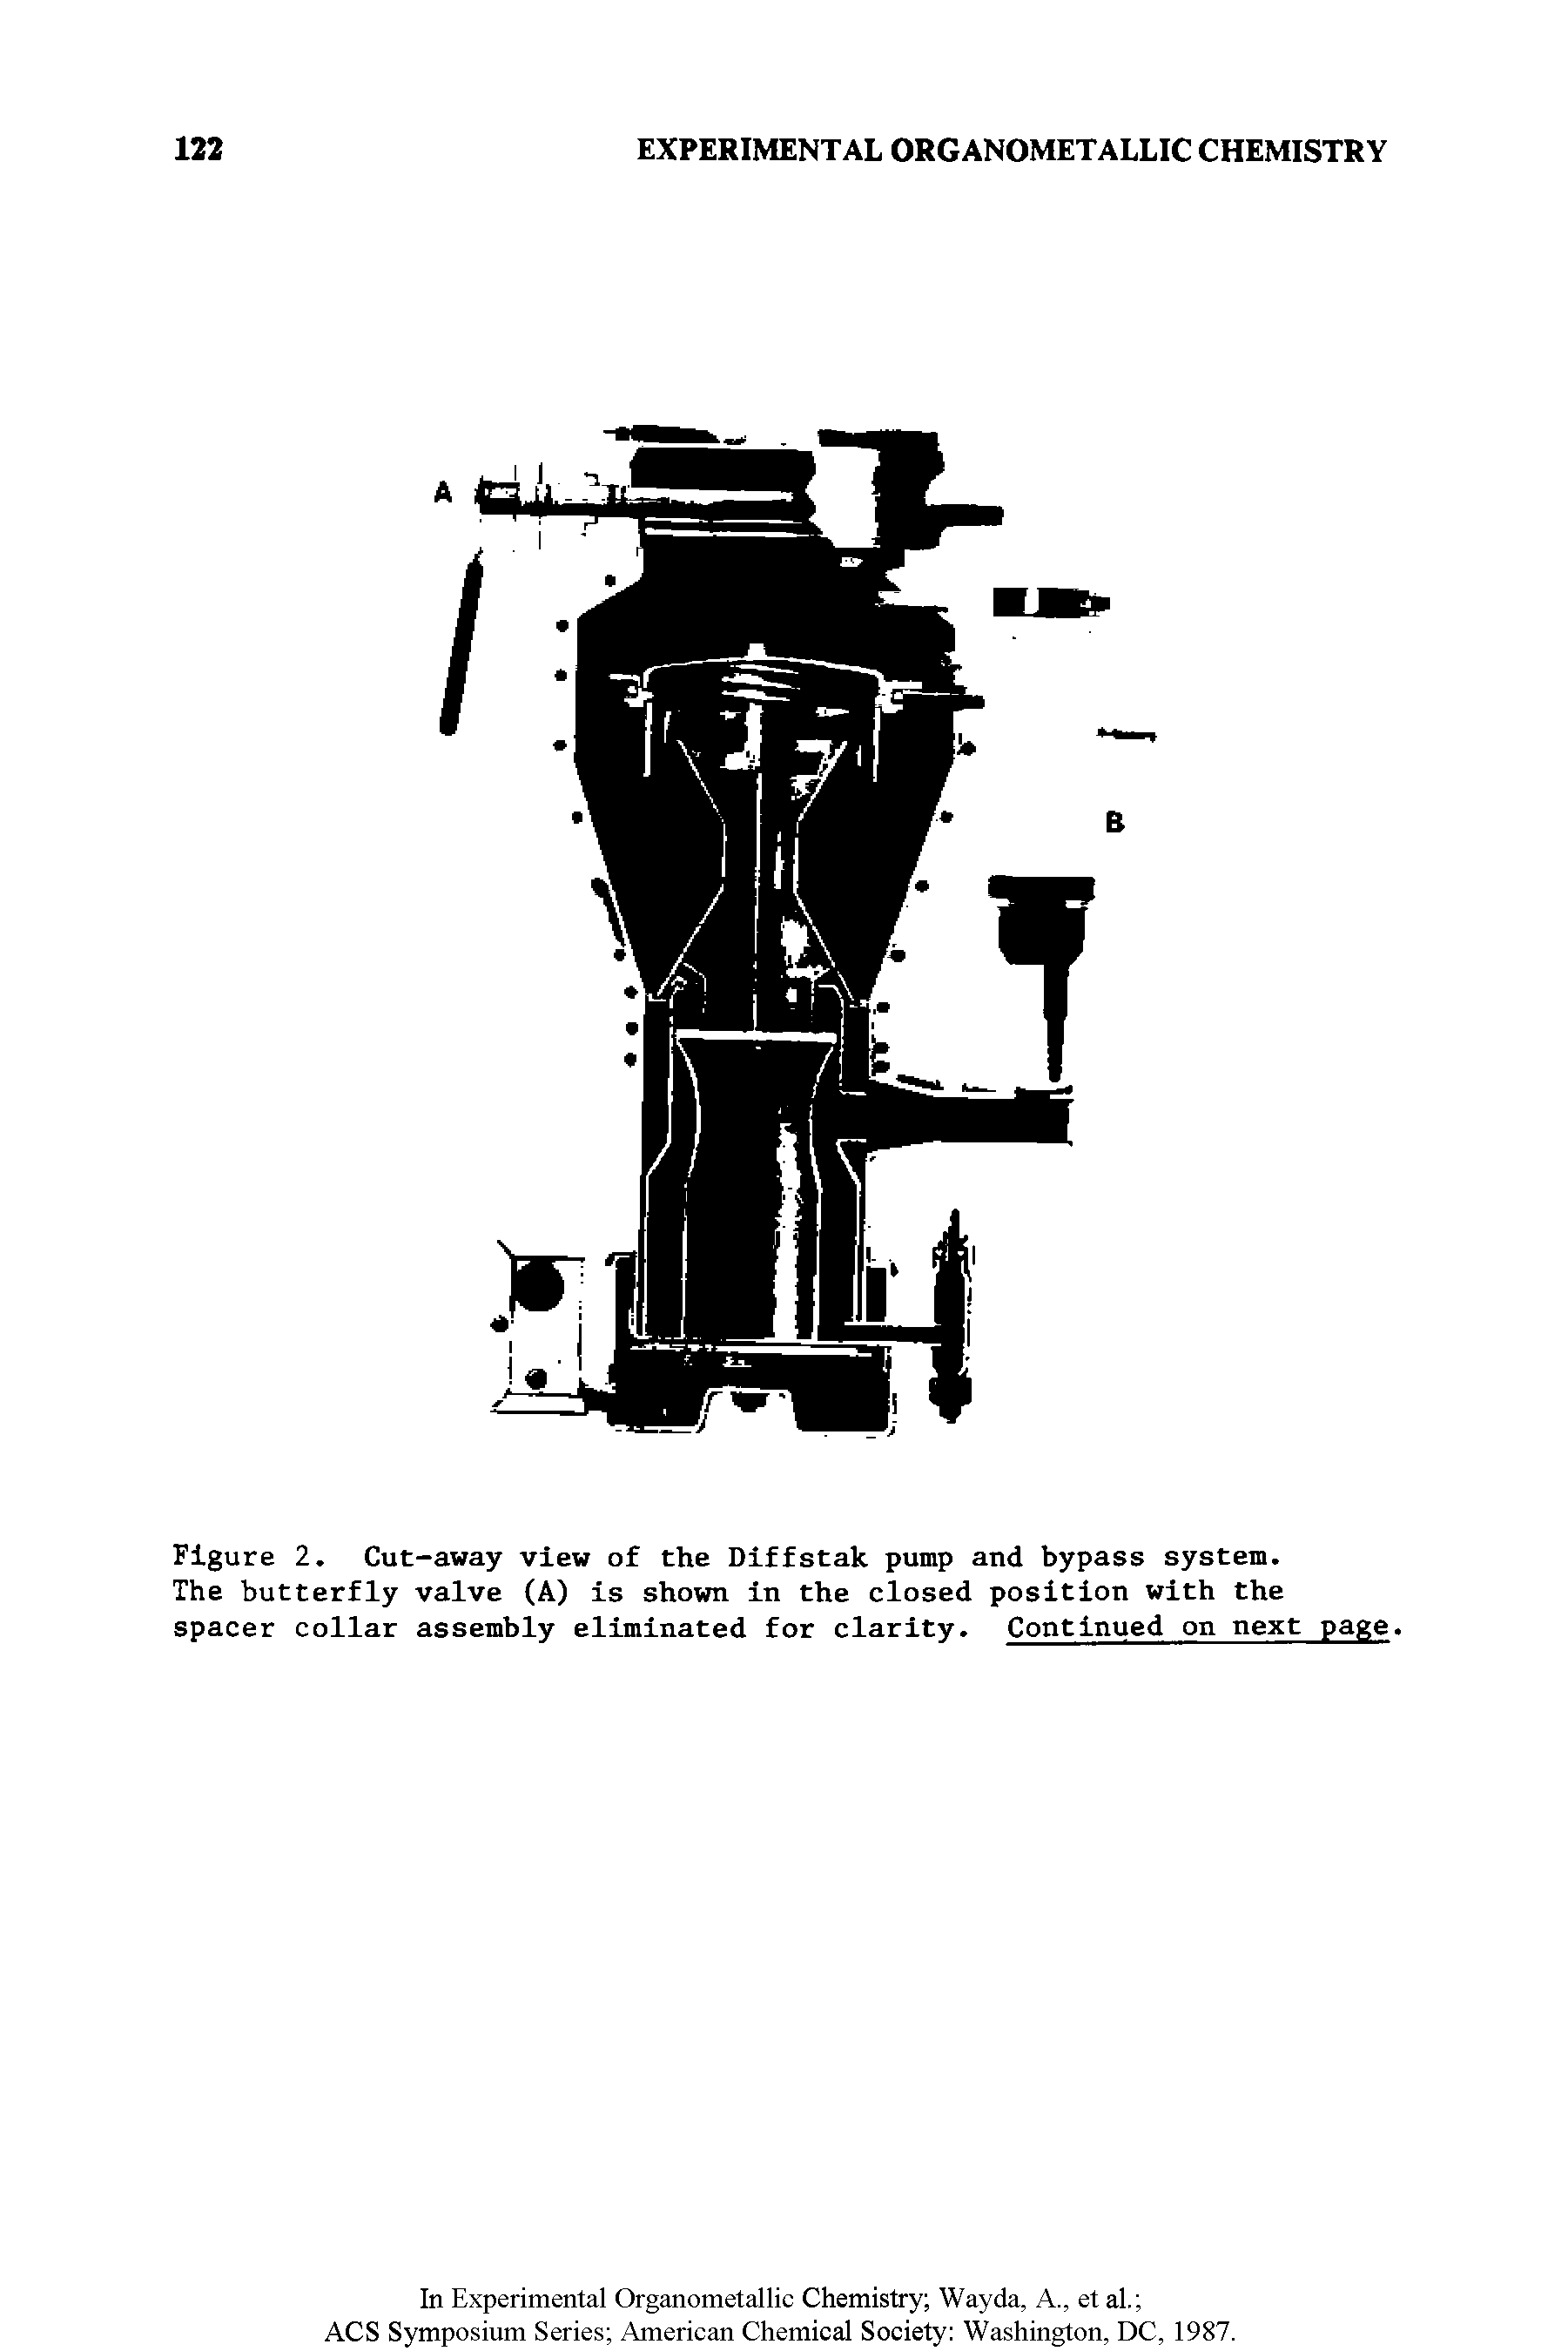 Figure 2. Cut-away view of the Diffstak pump and bypass system.